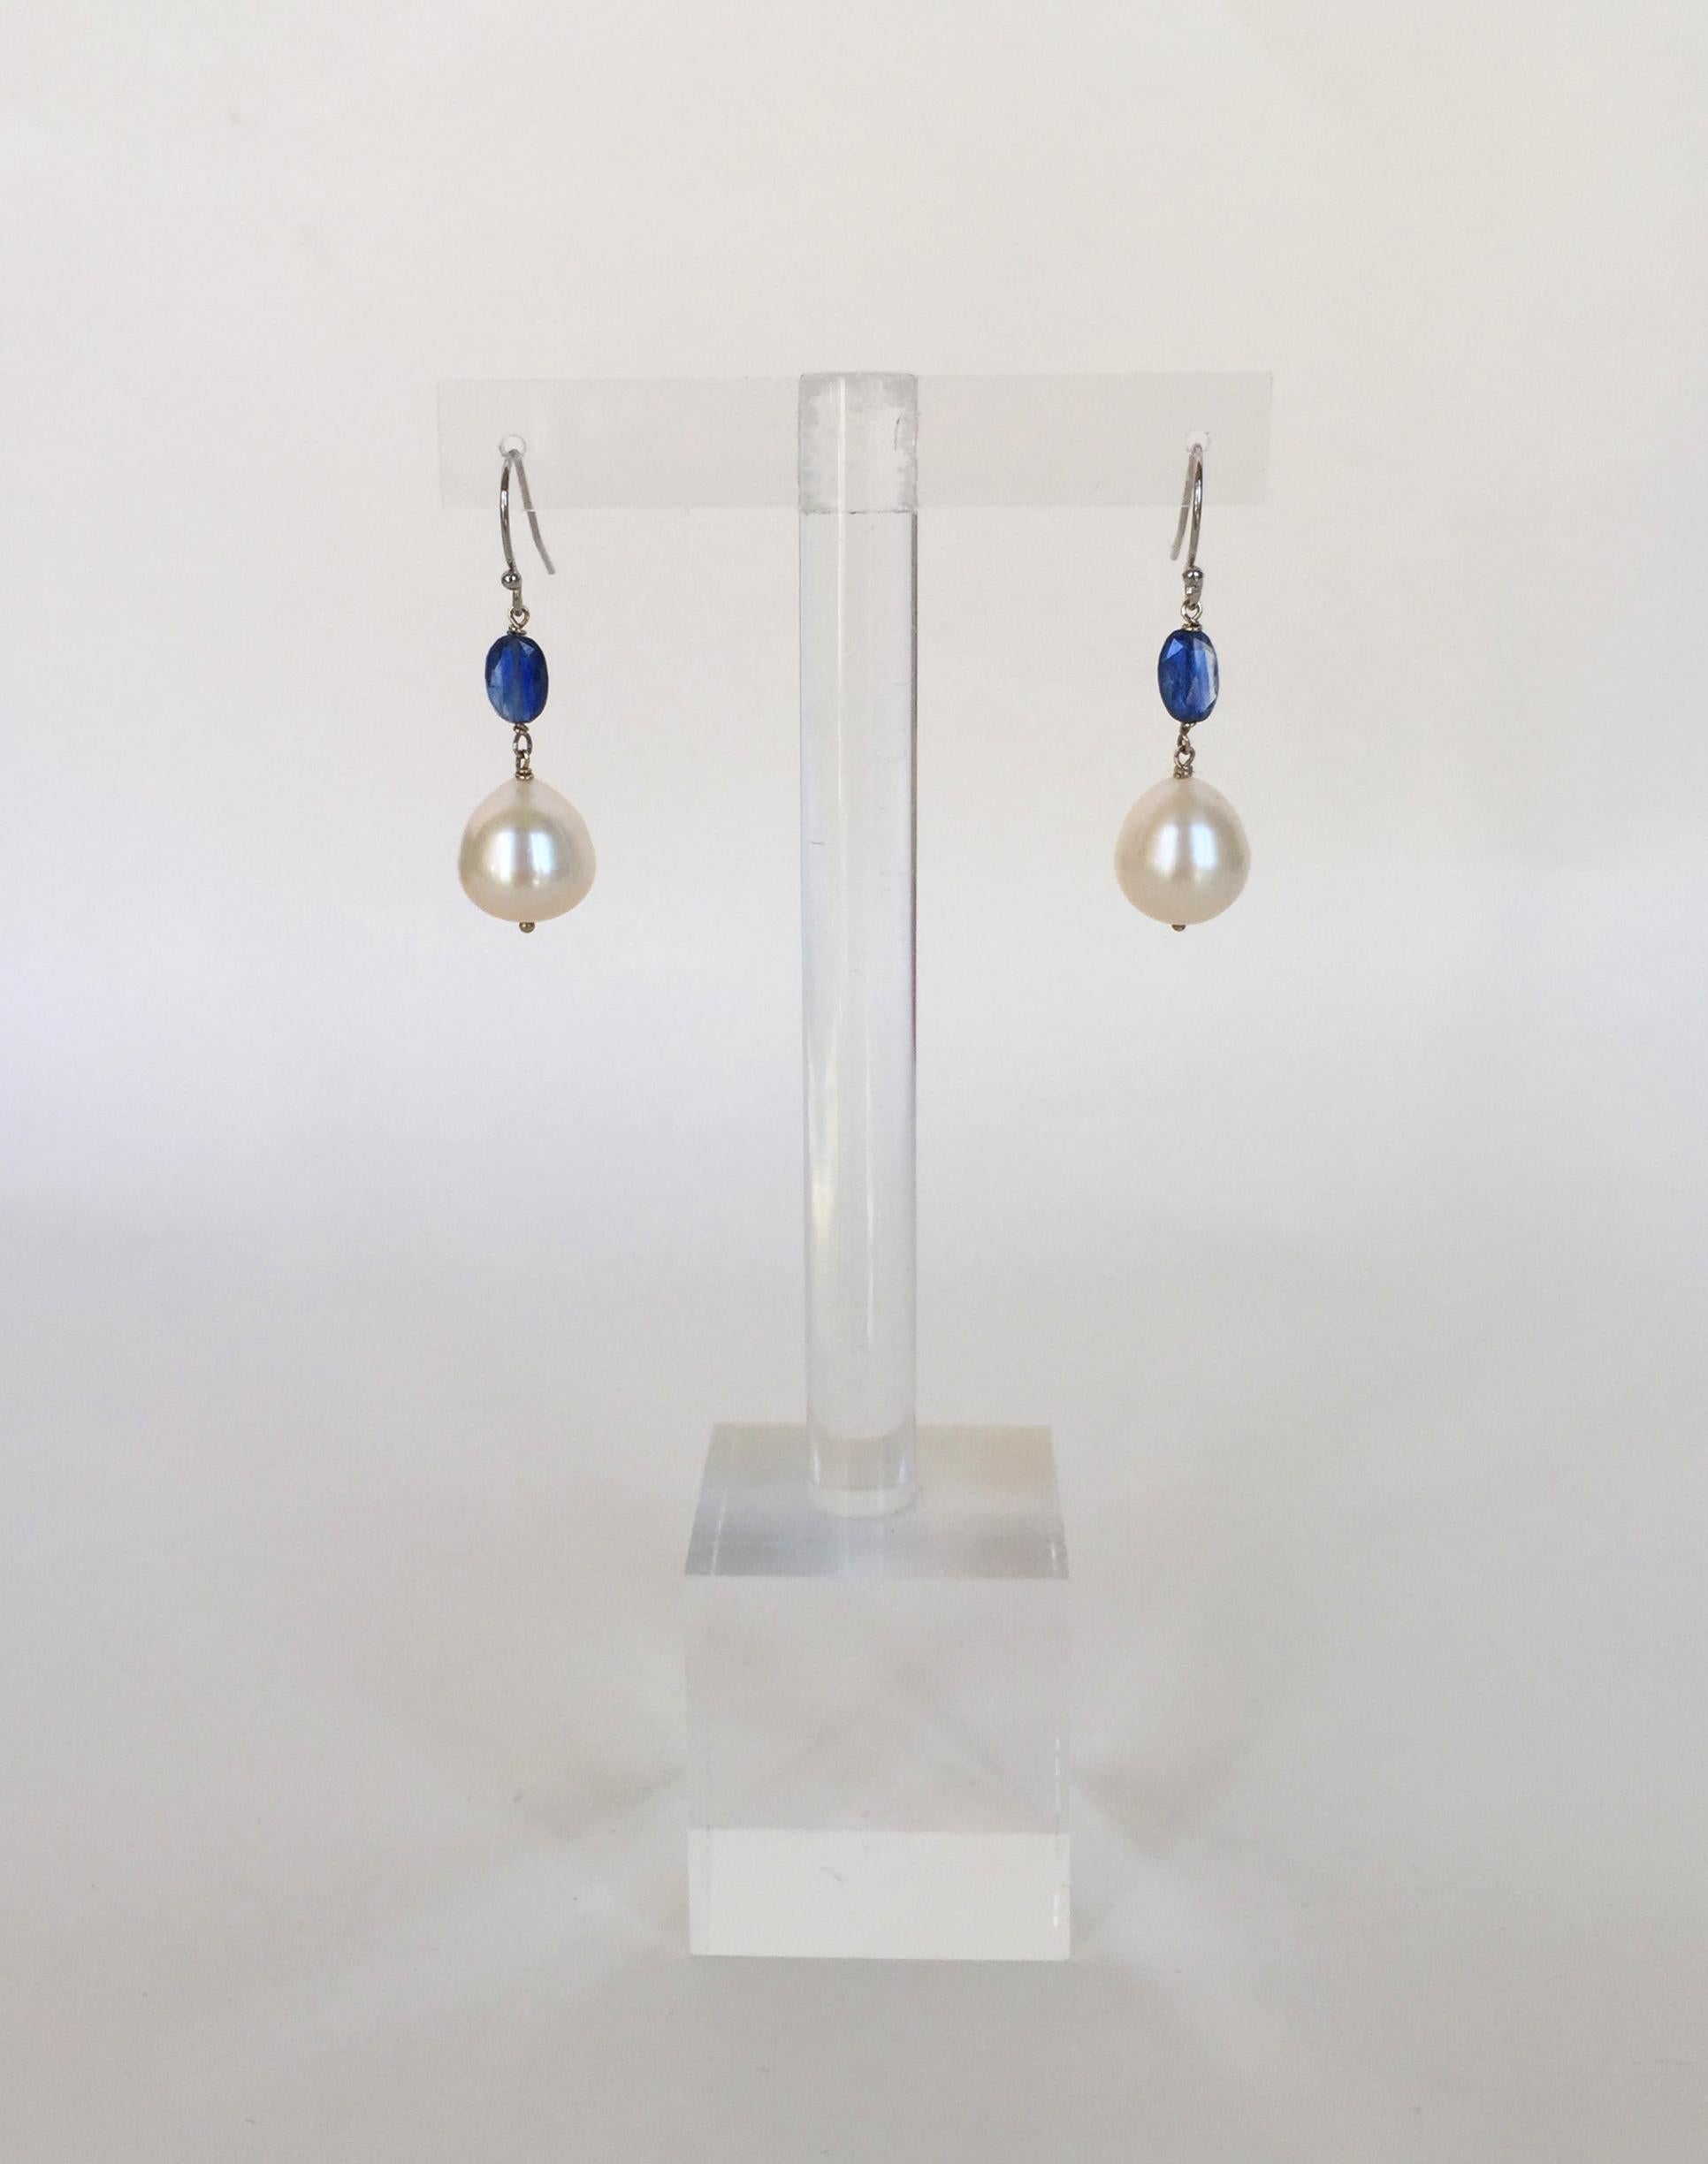 These white pearl and kyanite drop earrings with 14k white gold hooks are striking for the white and blue contrast. The glowing teardrop white pearl is made more studding with the deep blue kyanite faceted bead. These earrings are a twist on the